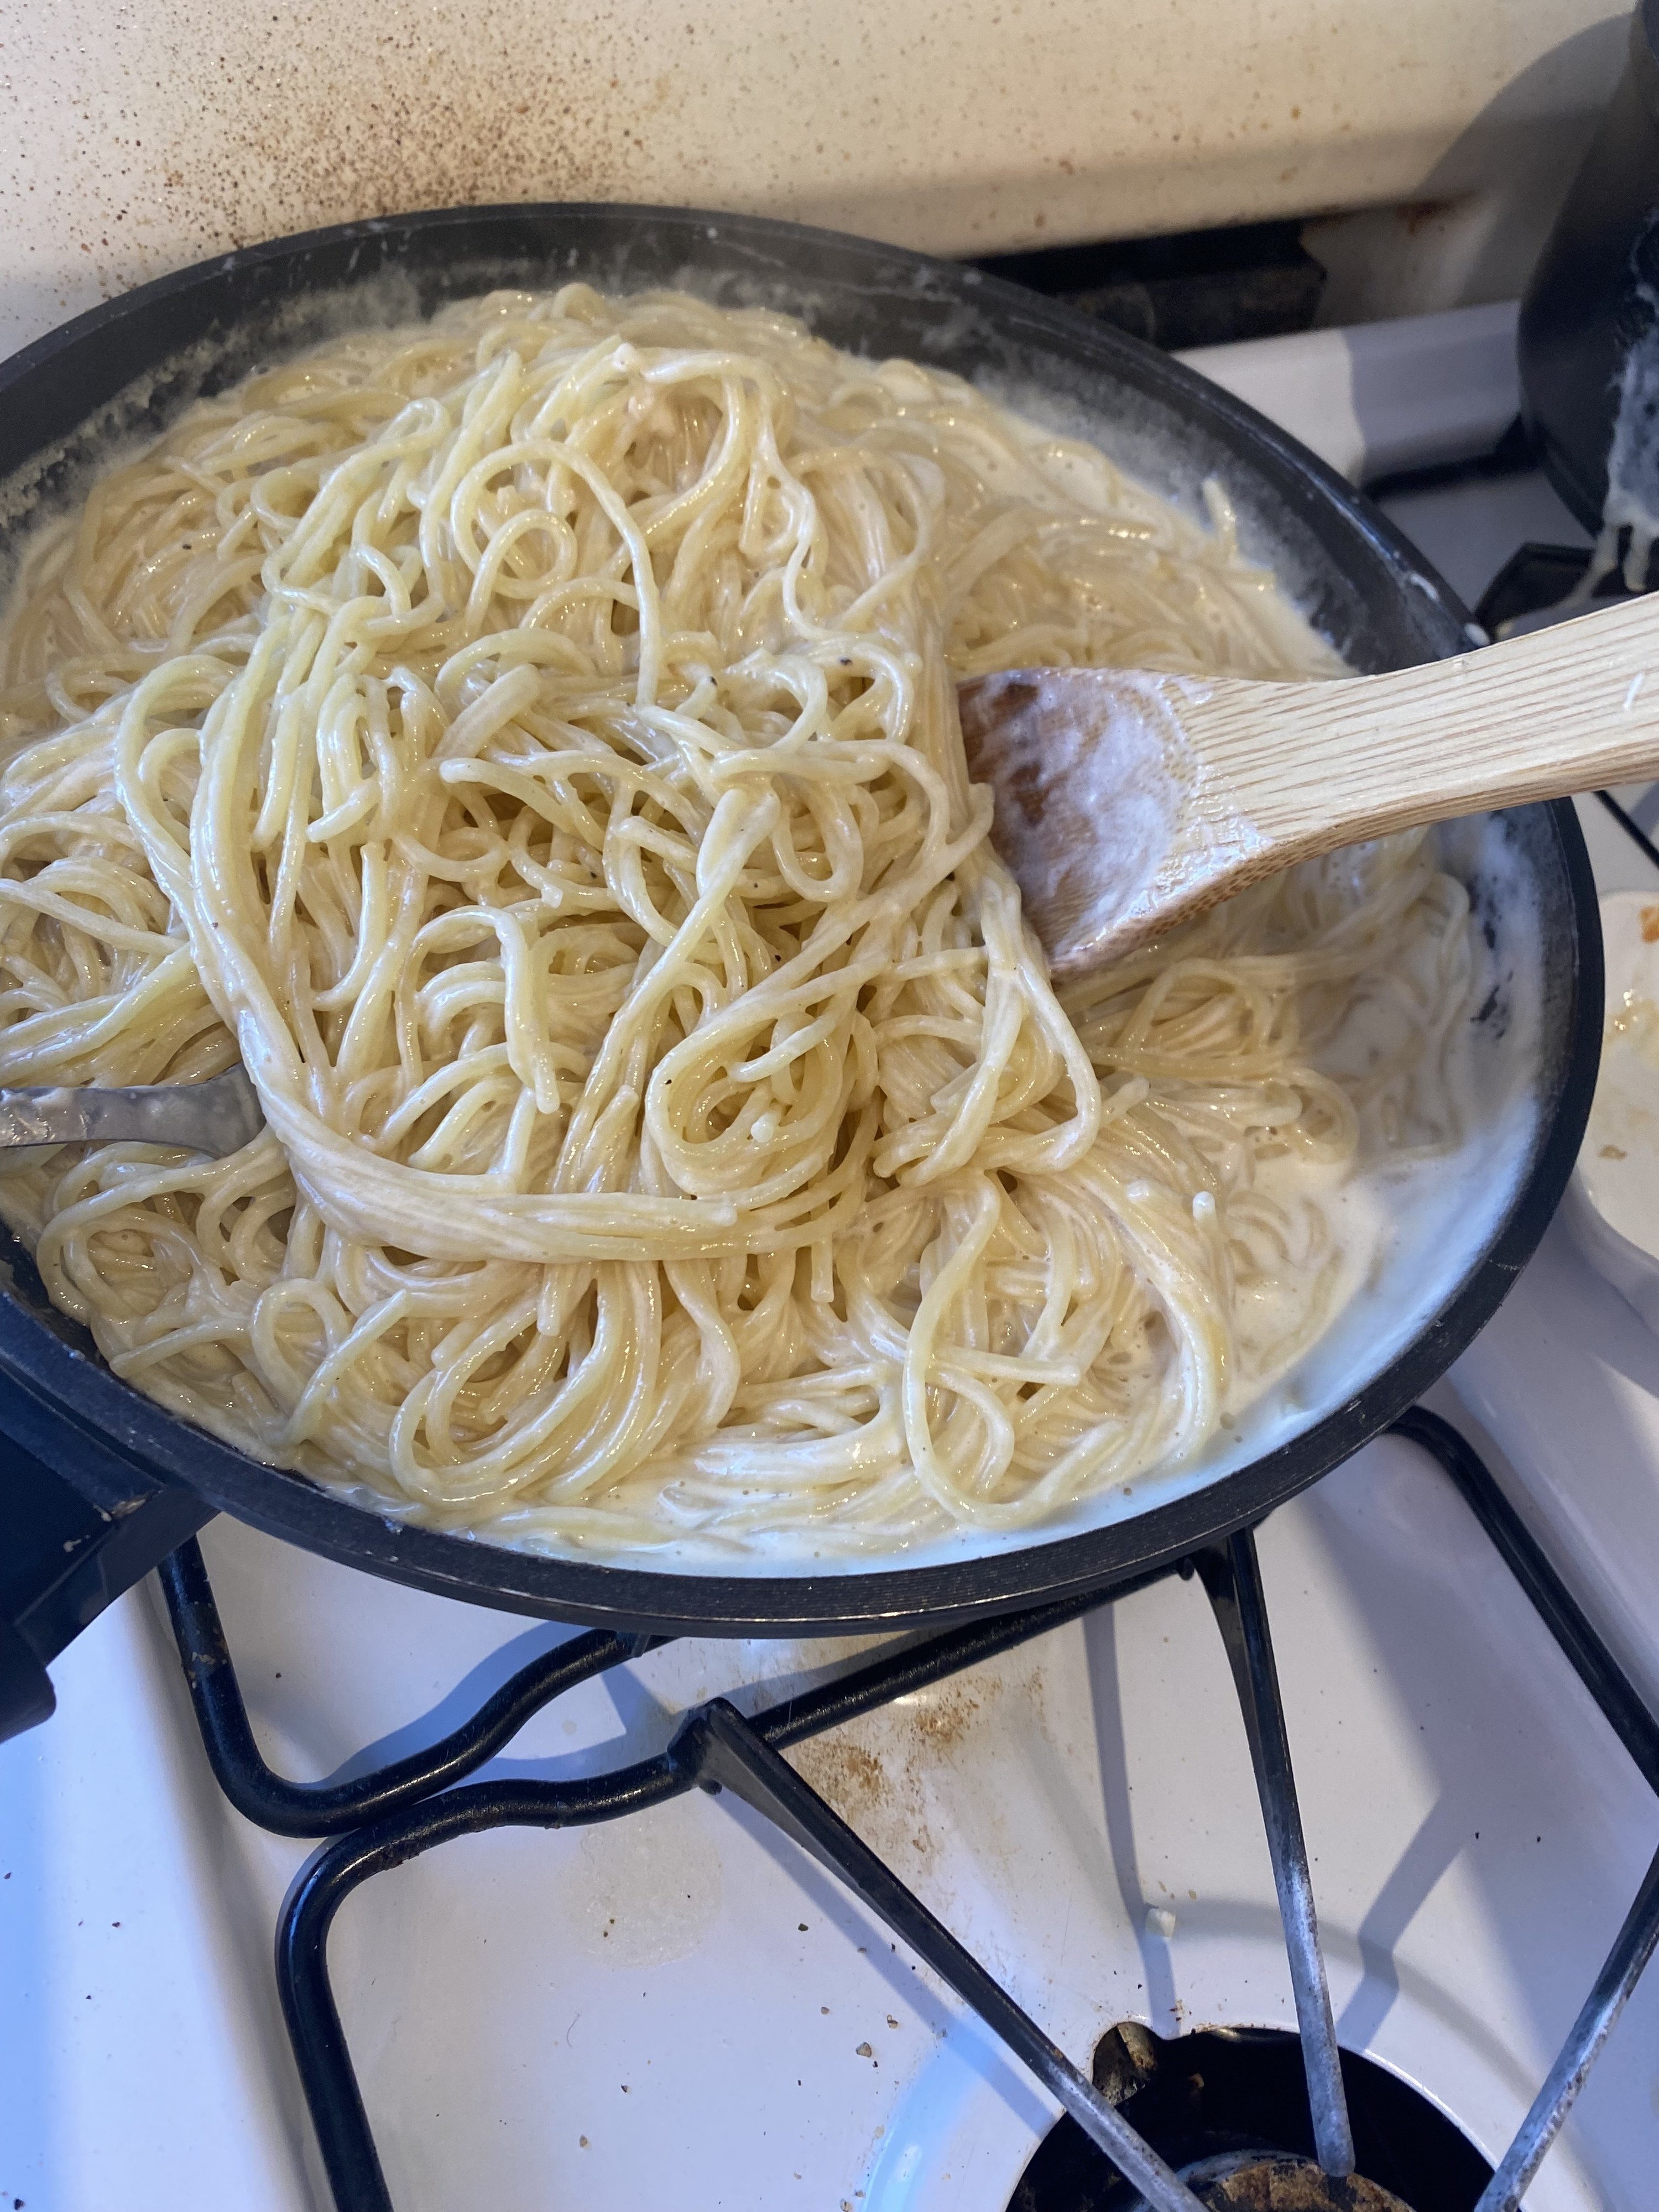 the noodles being added to the pan with the sauce